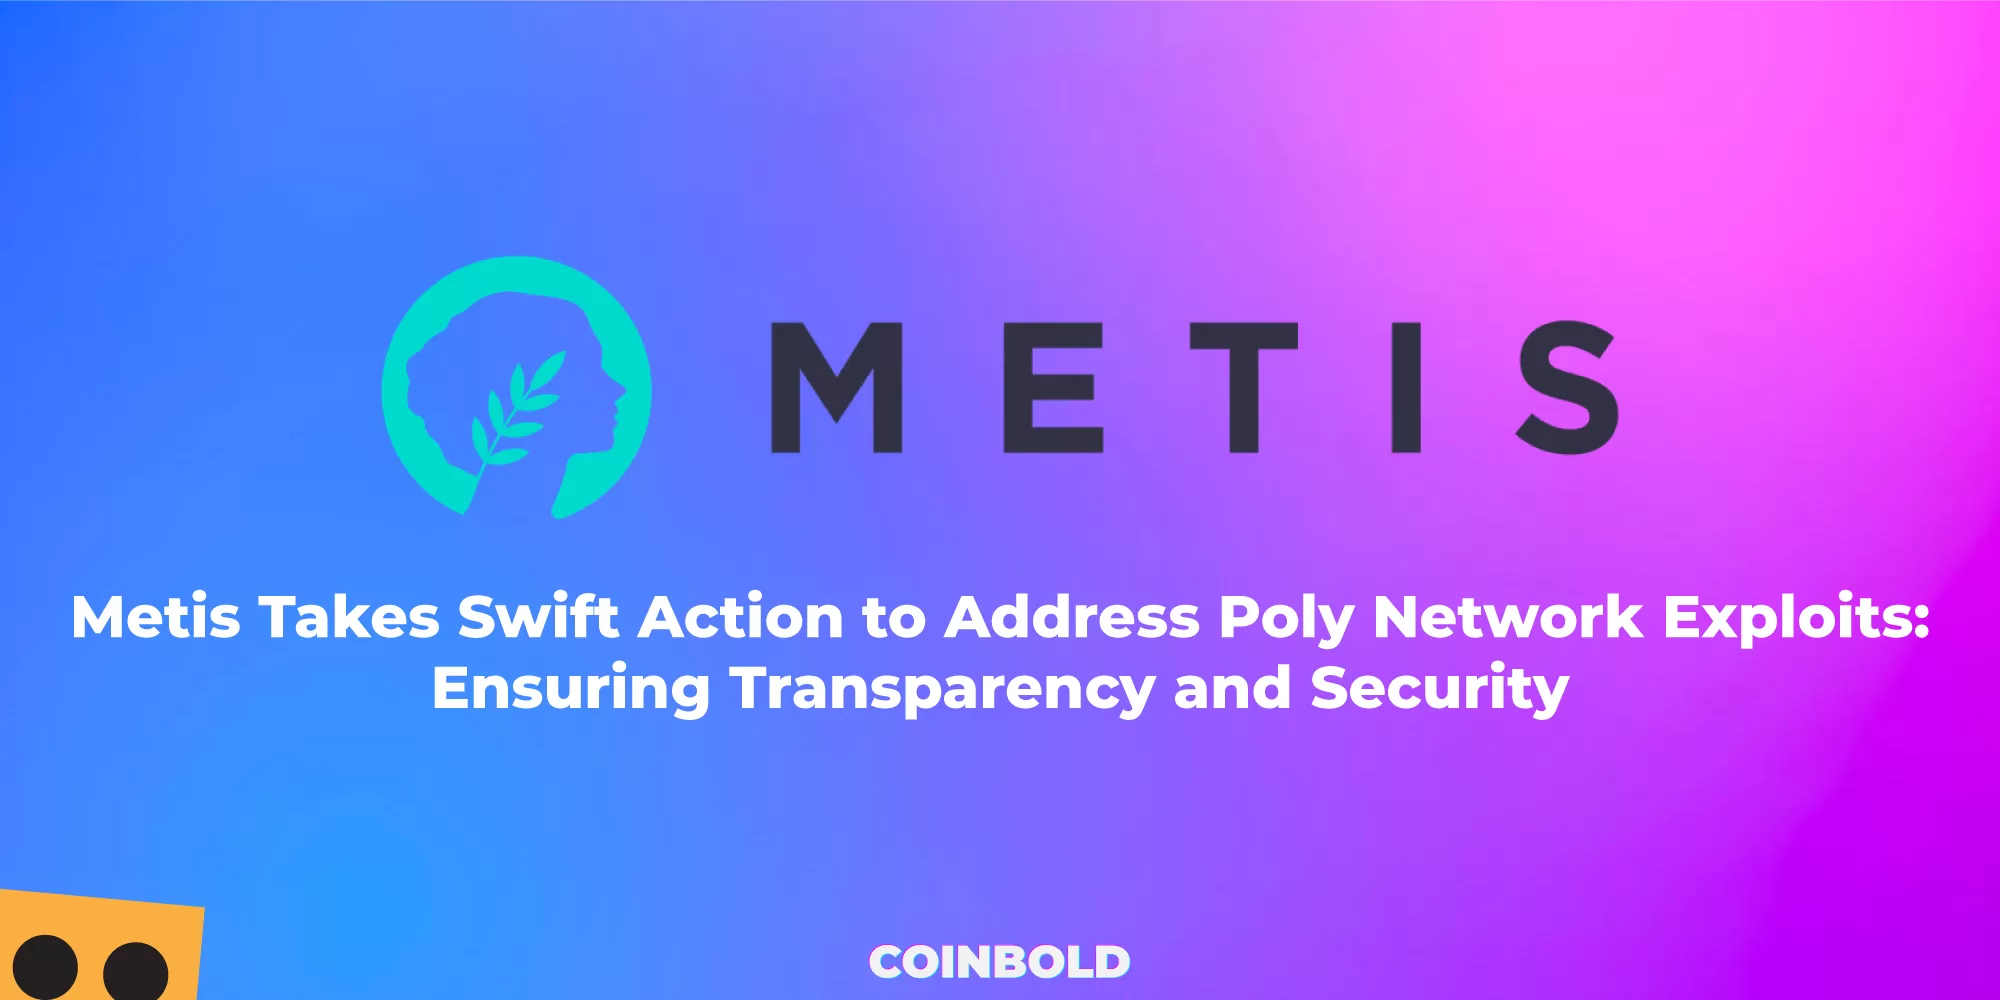 Metis Takes Swift Action to Address Poly Network Exploits: Ensuring Transparency and Security